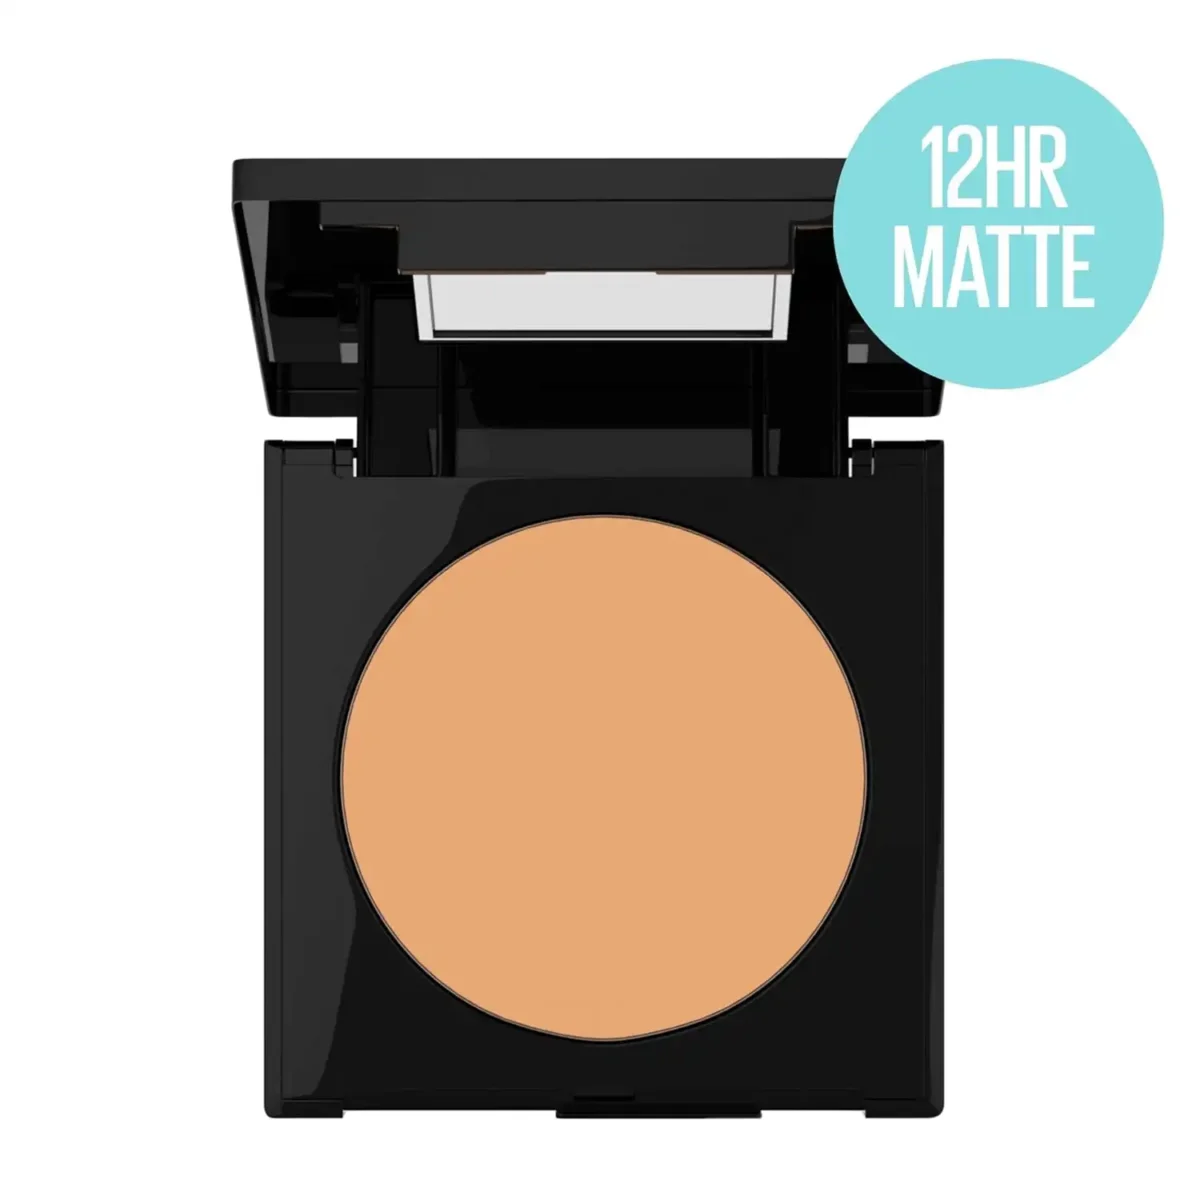 Maybelline Fit Me Matte and Poreless Pressed Powder Natural Tan 320 (2)